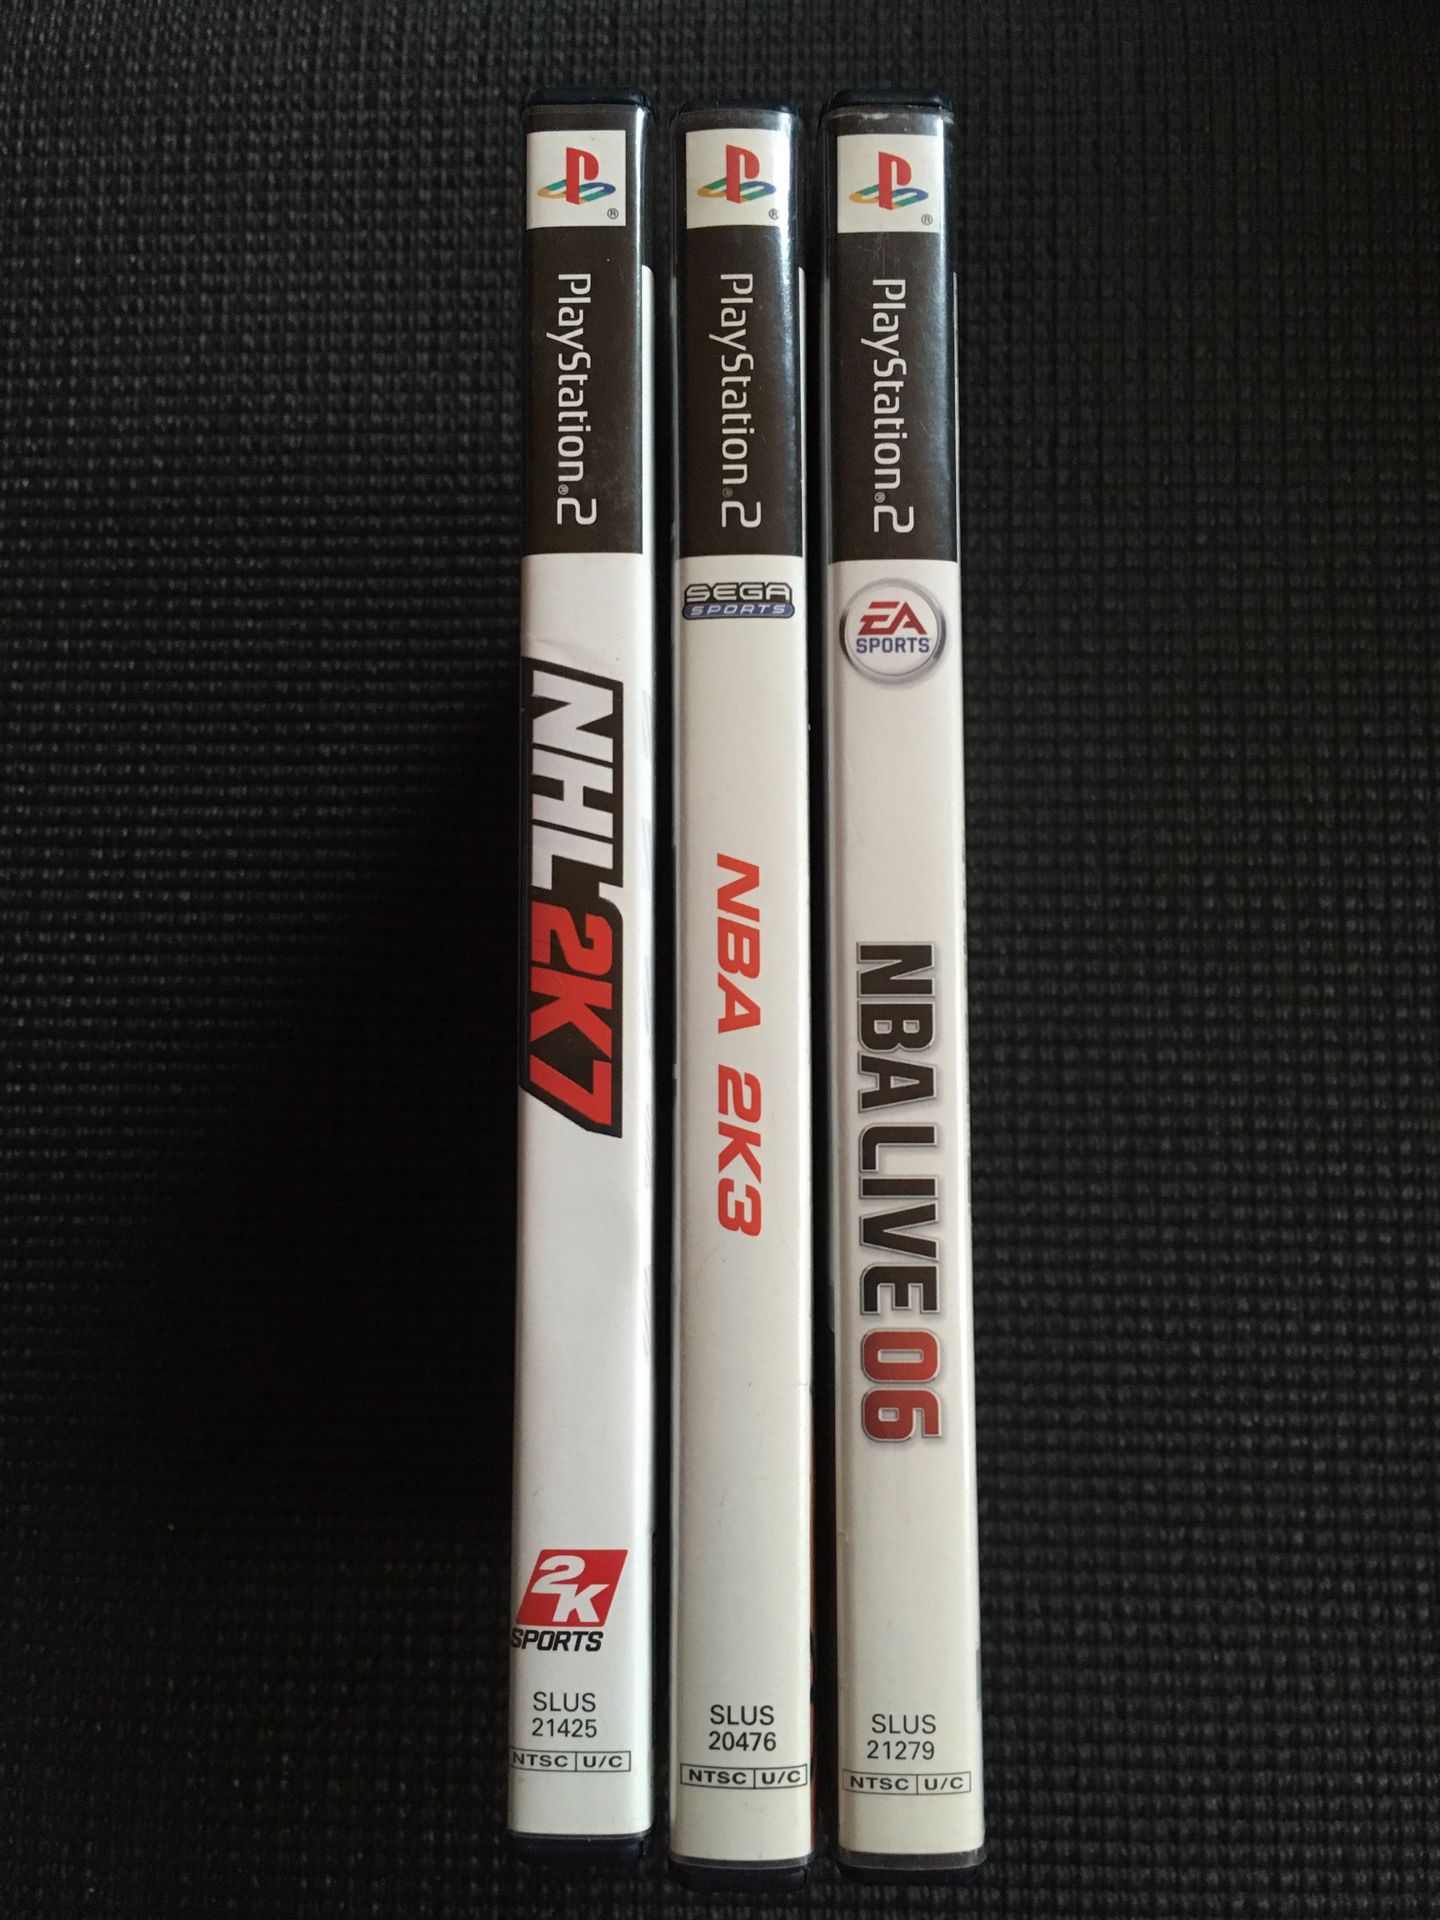 NBA & NHL for PS2